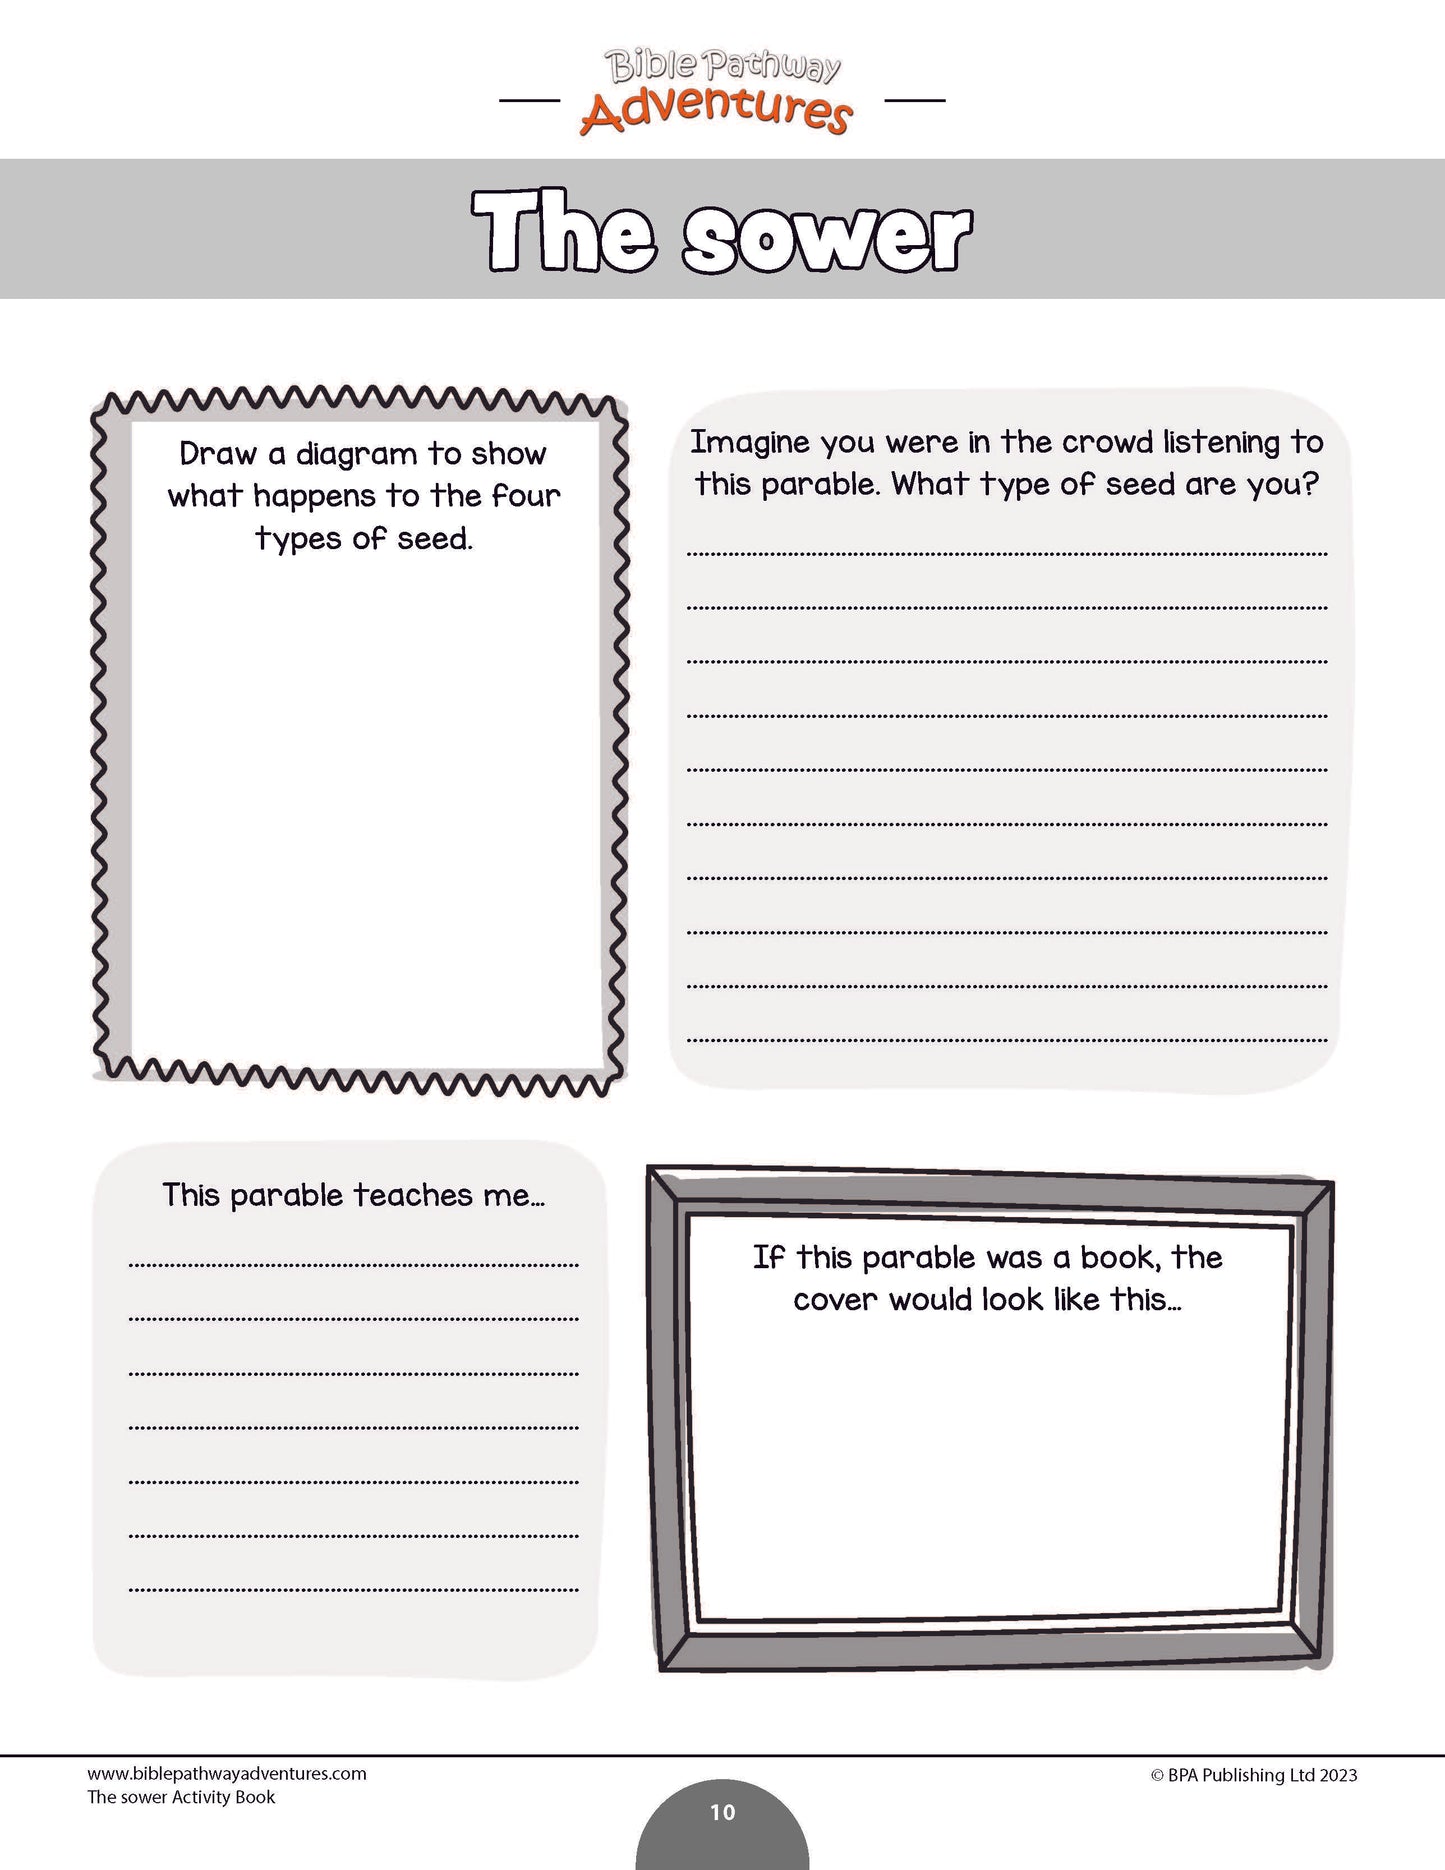 Parable of the Sower Activity Book